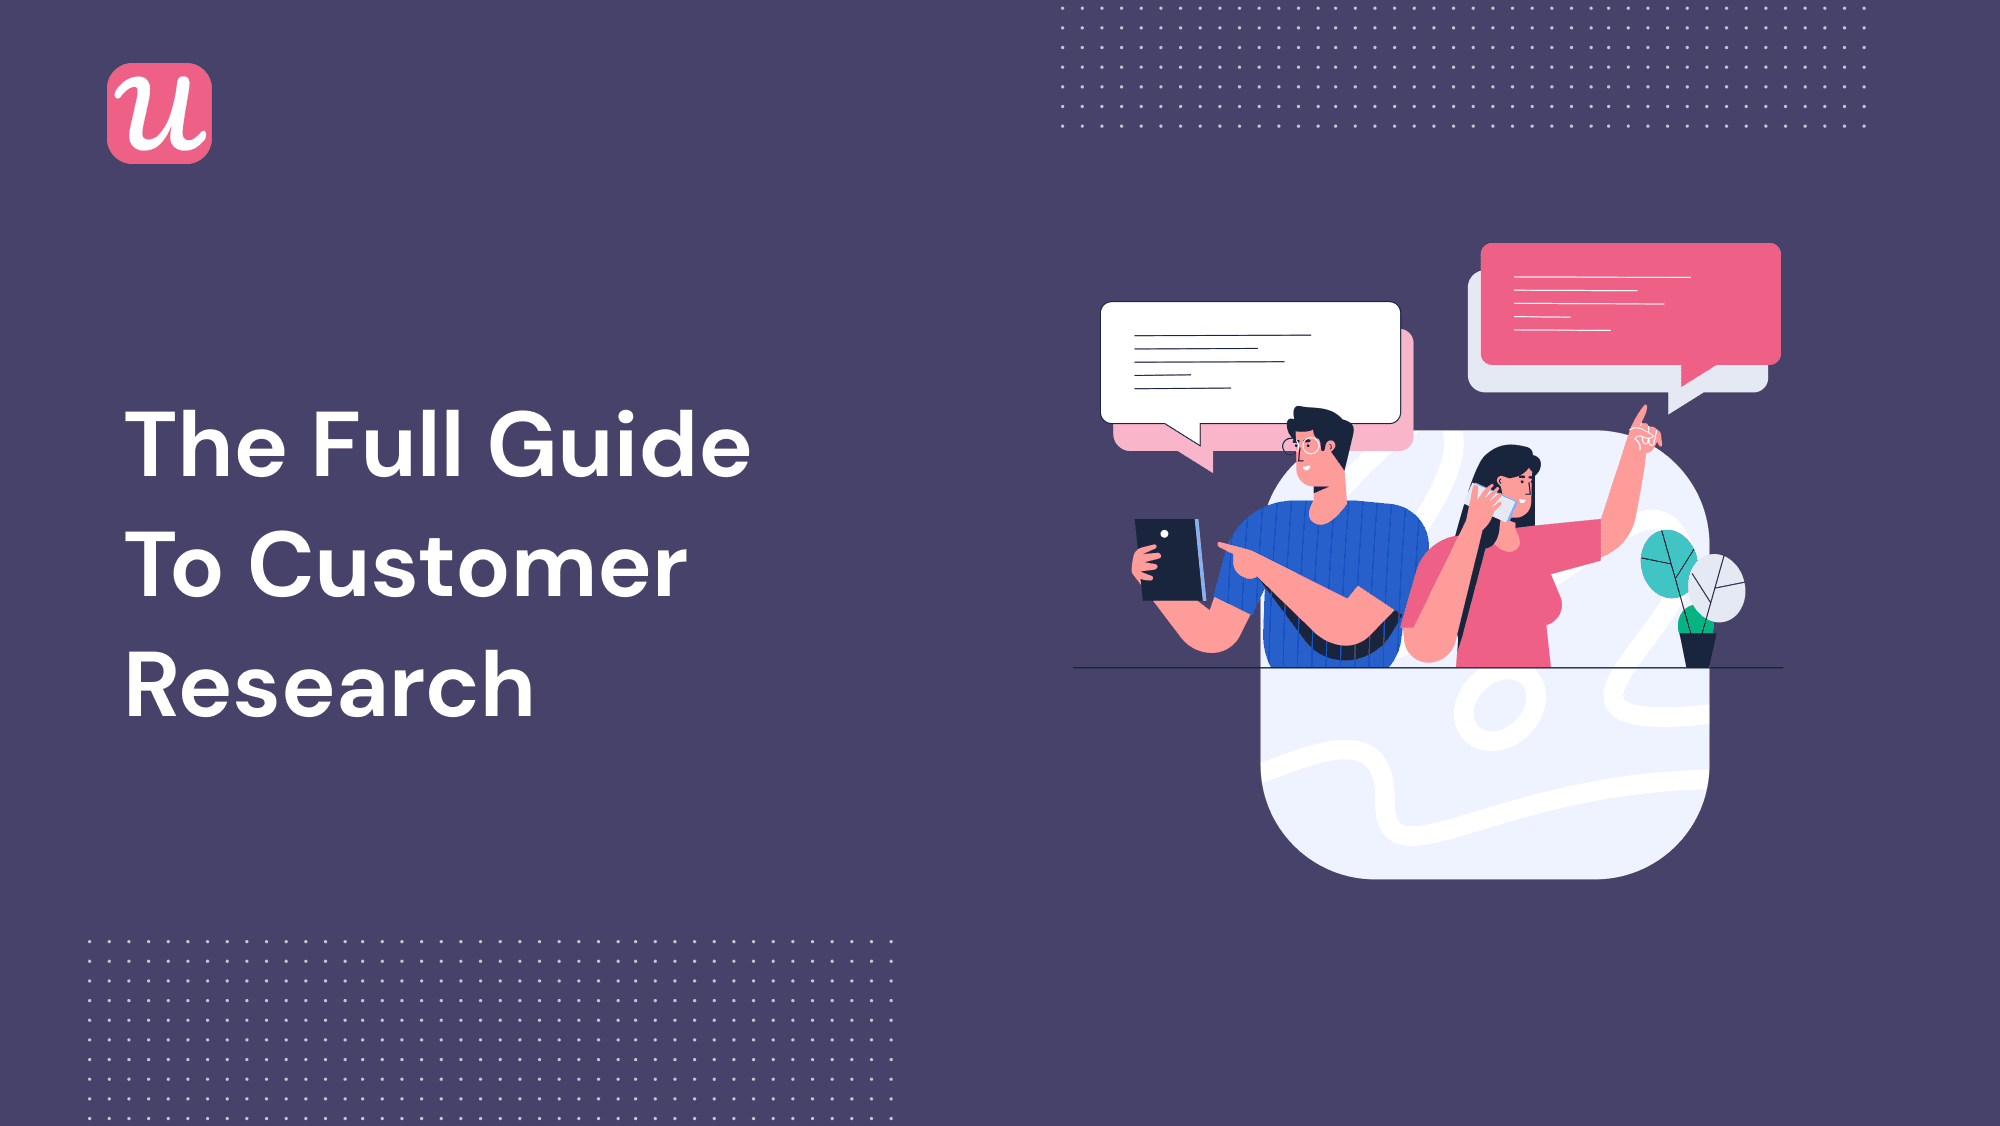 The Full Guide to Customer Research for SaaS in 2021